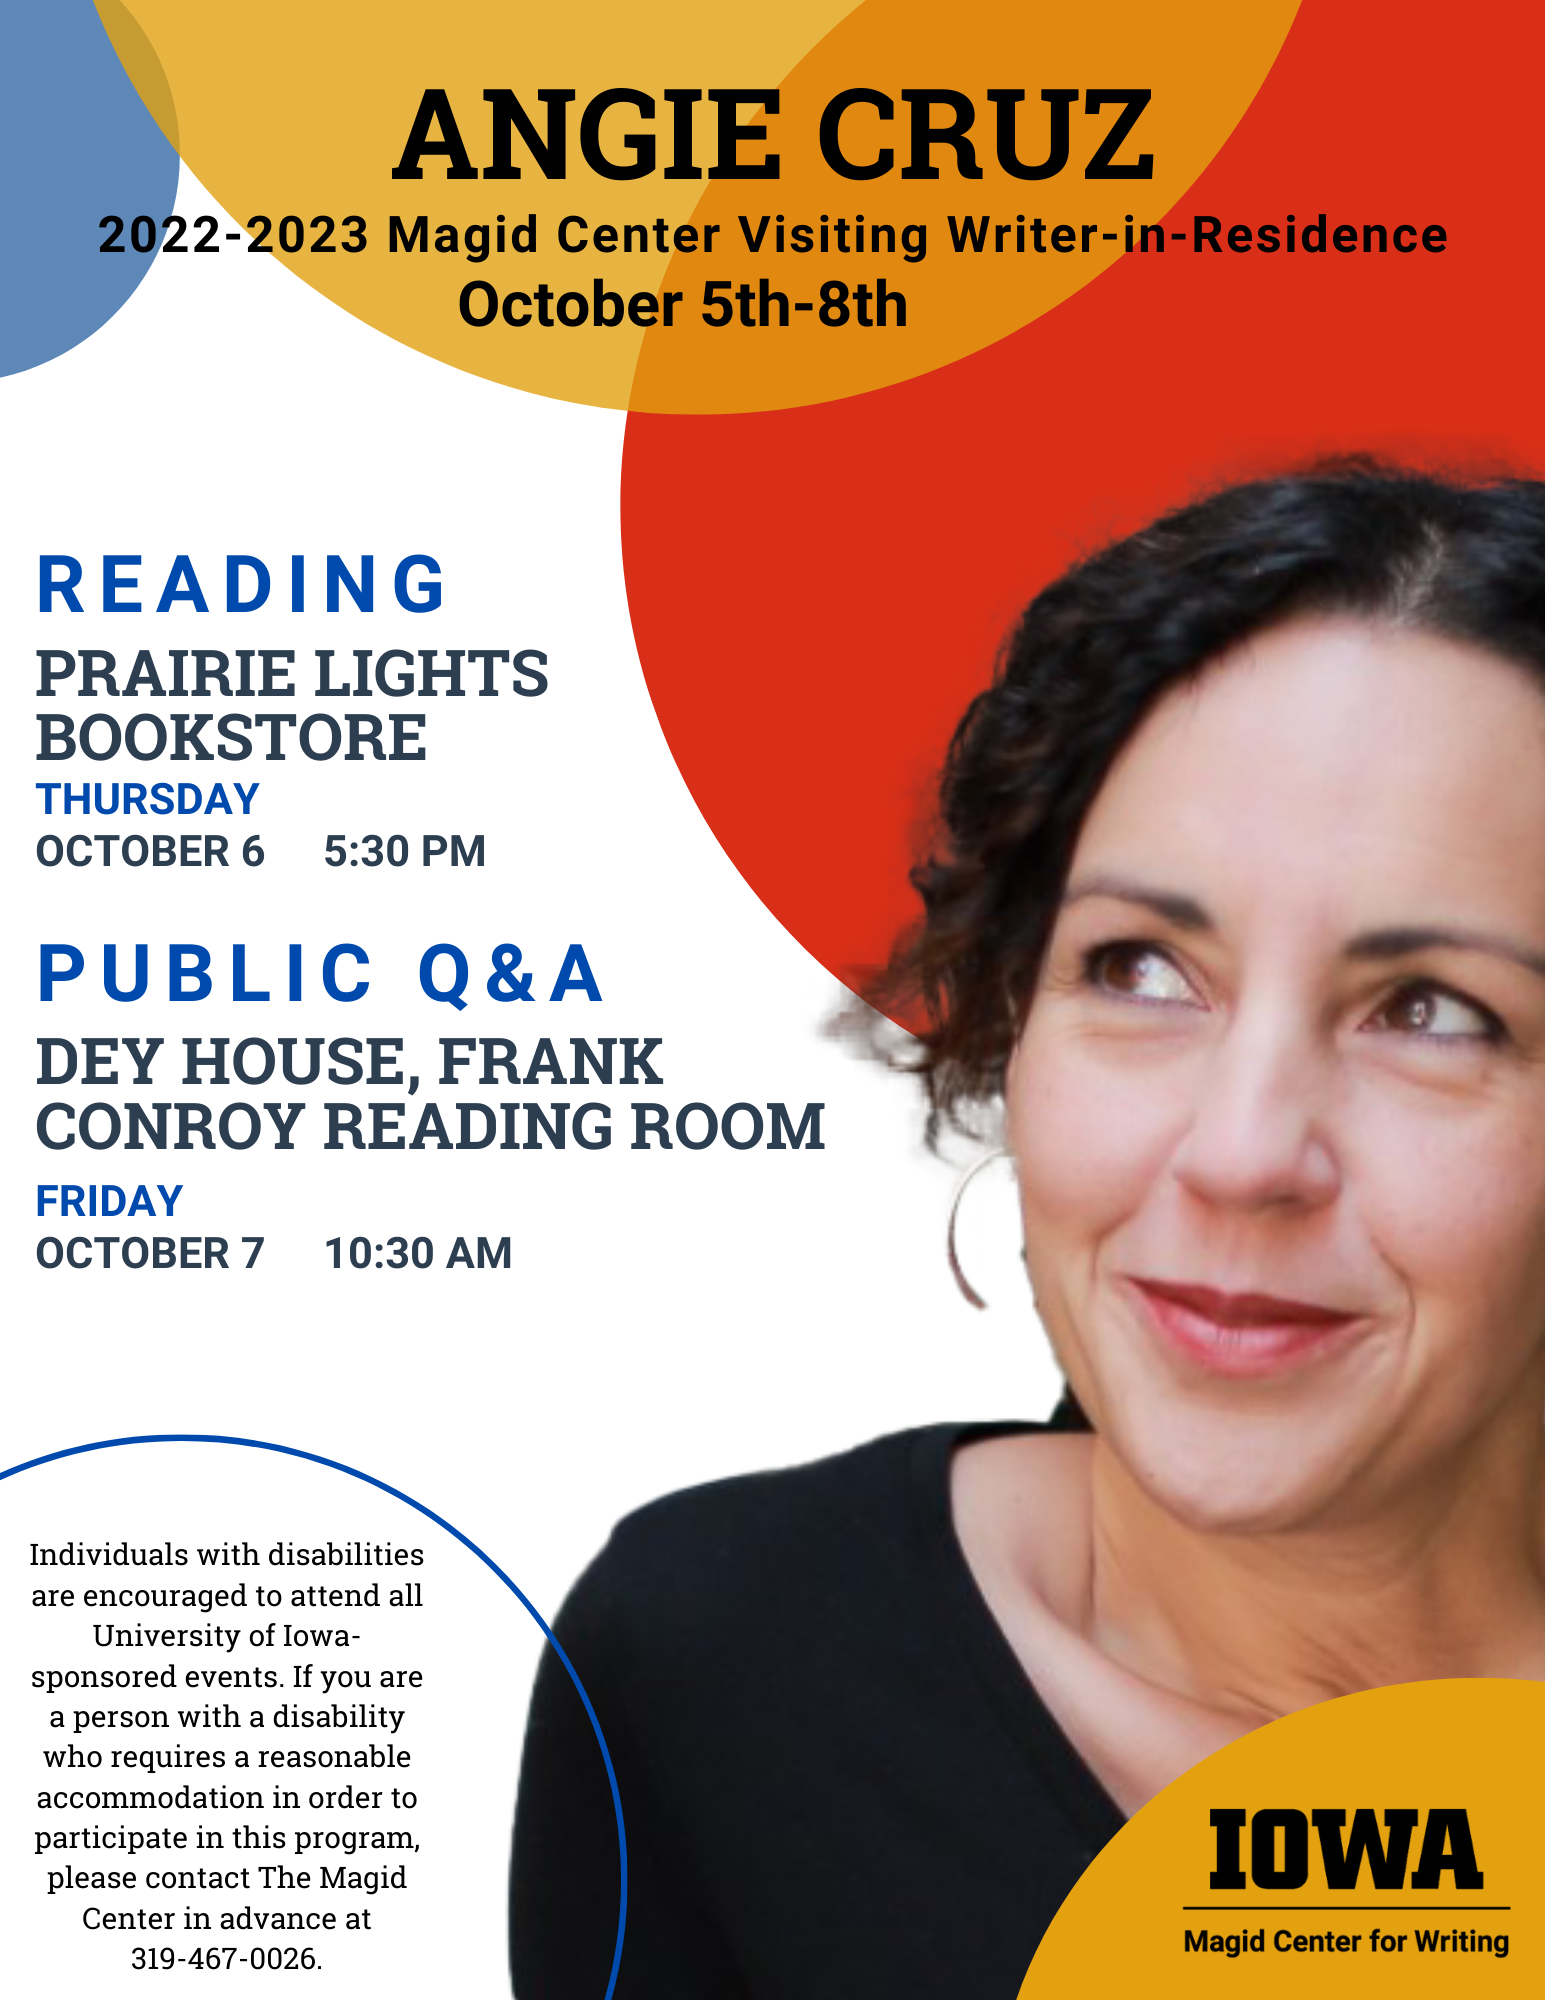 Angie Cruz 2022-2023 Magid Center Visiting Writer-in-Residence Event Flyer